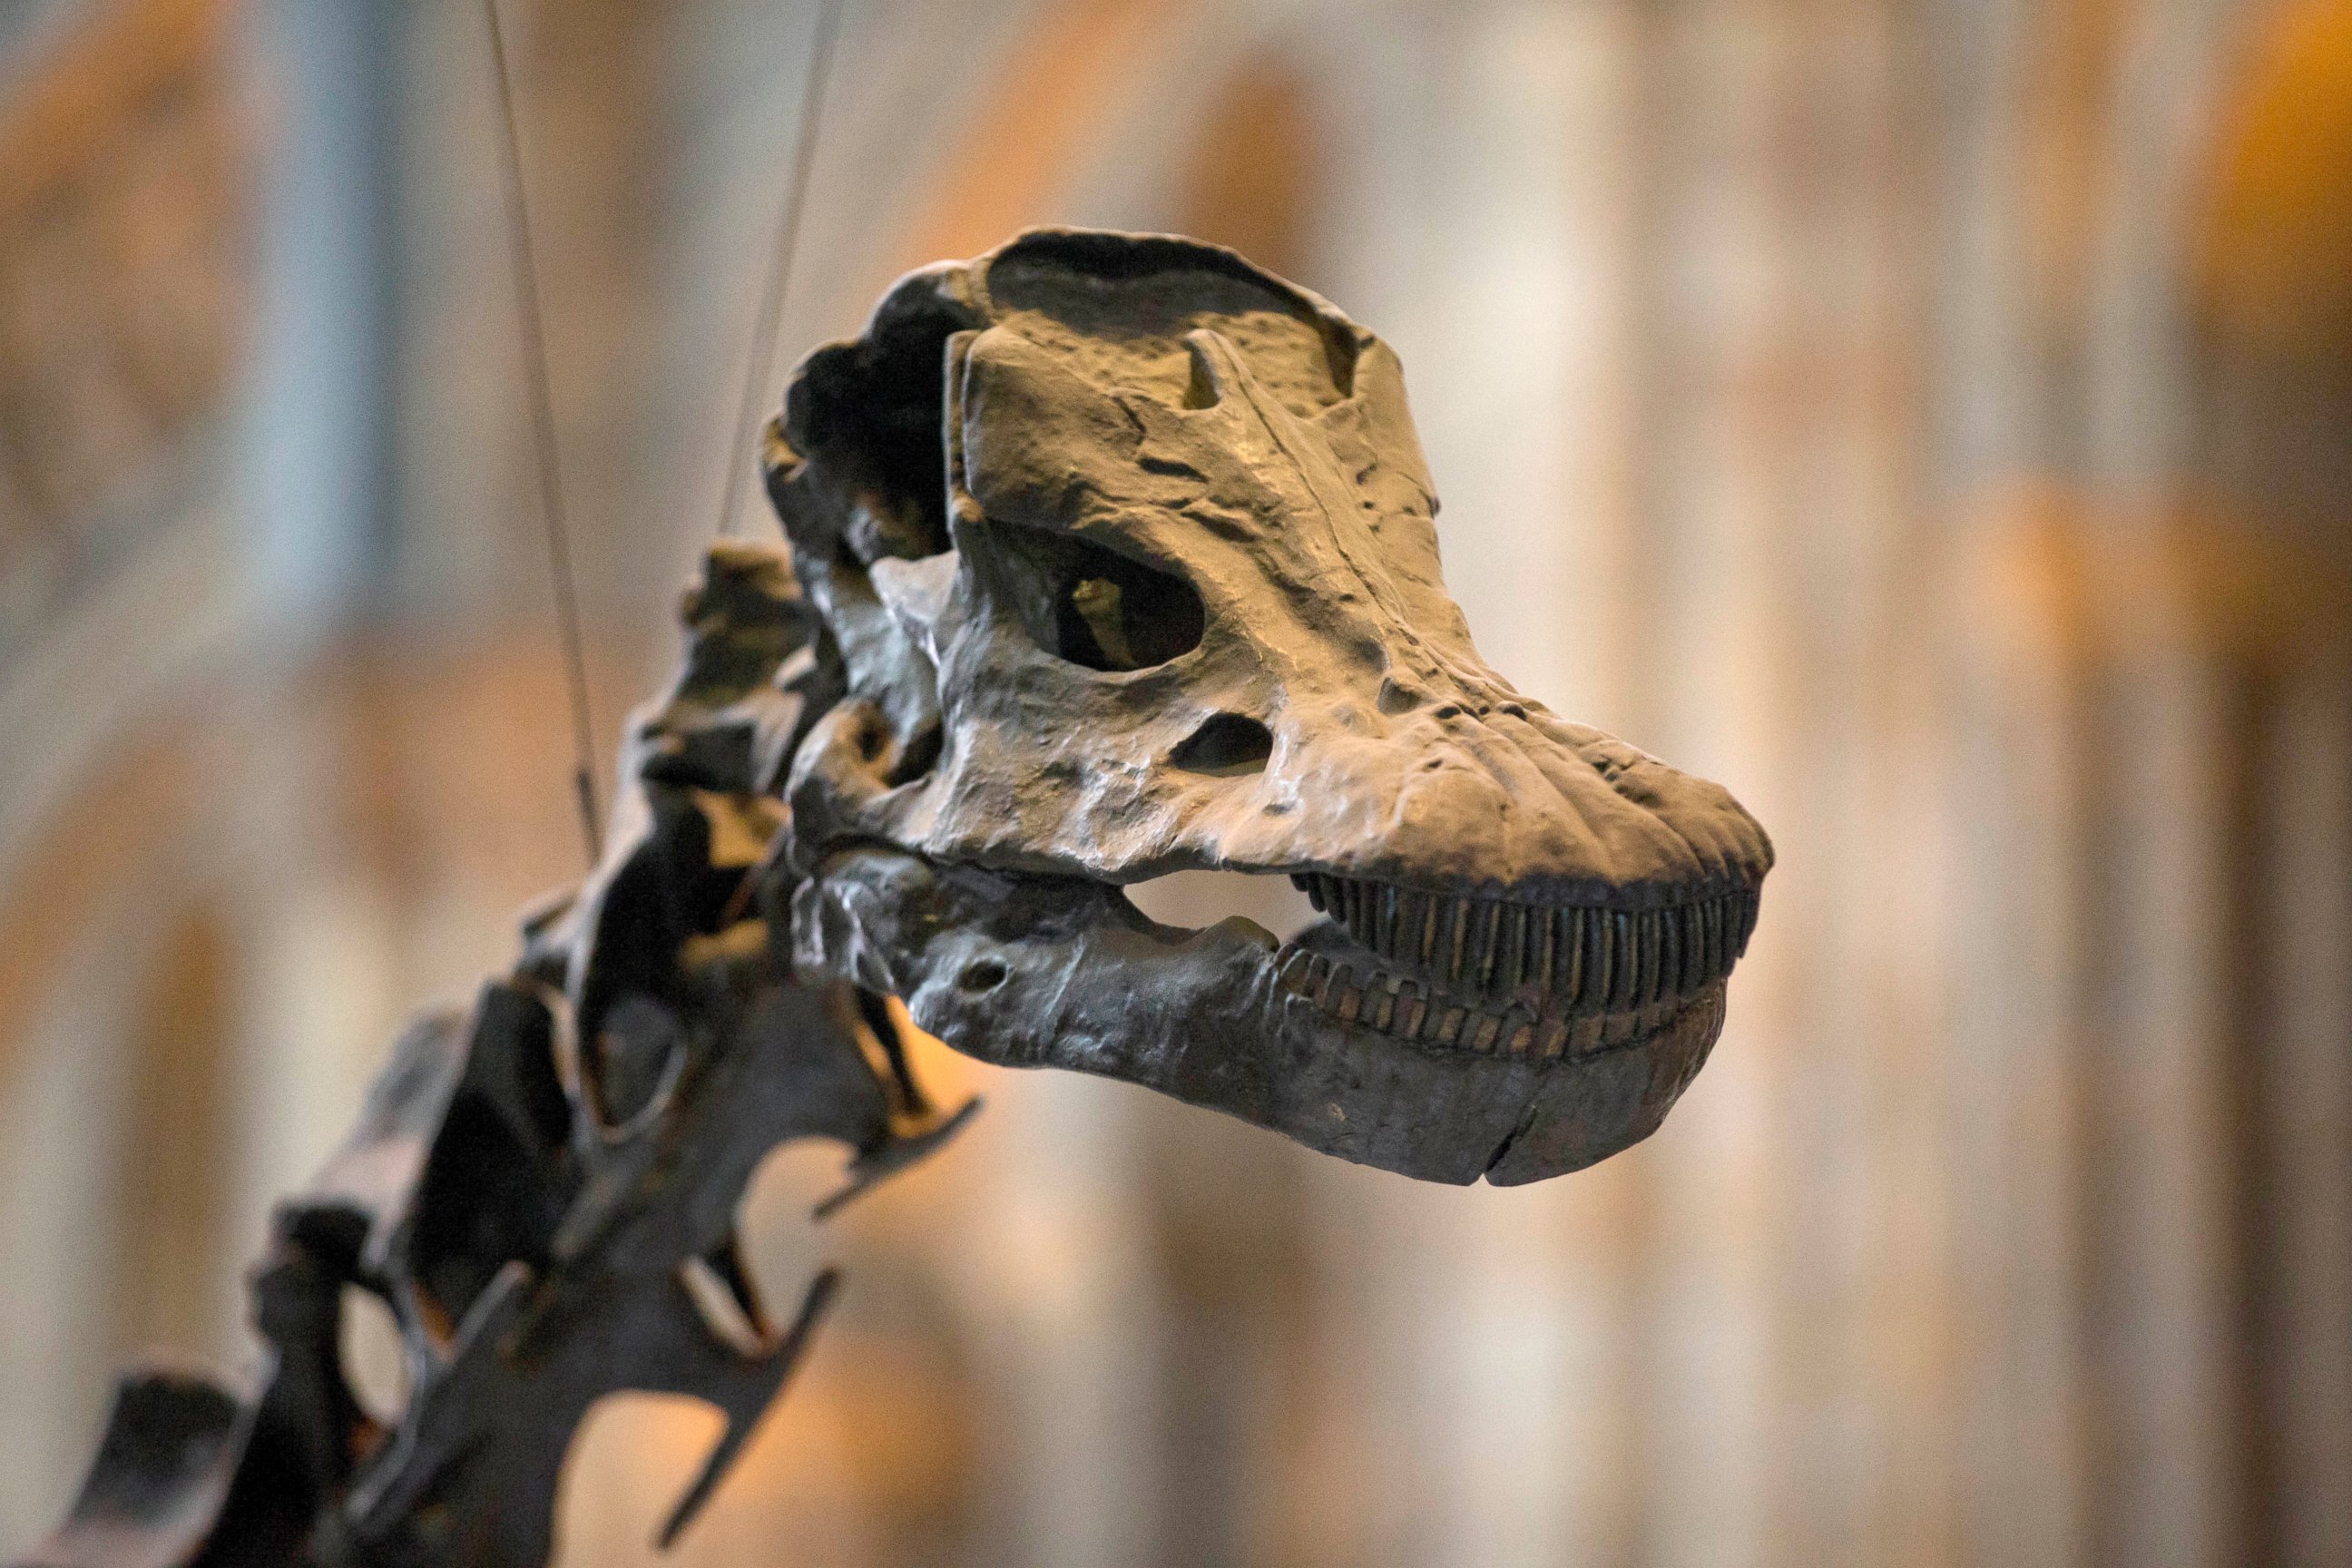 PHOTO: Dippy the dinosaur stands on display in the Natural History Museum in London, Jan. 29, 2015.